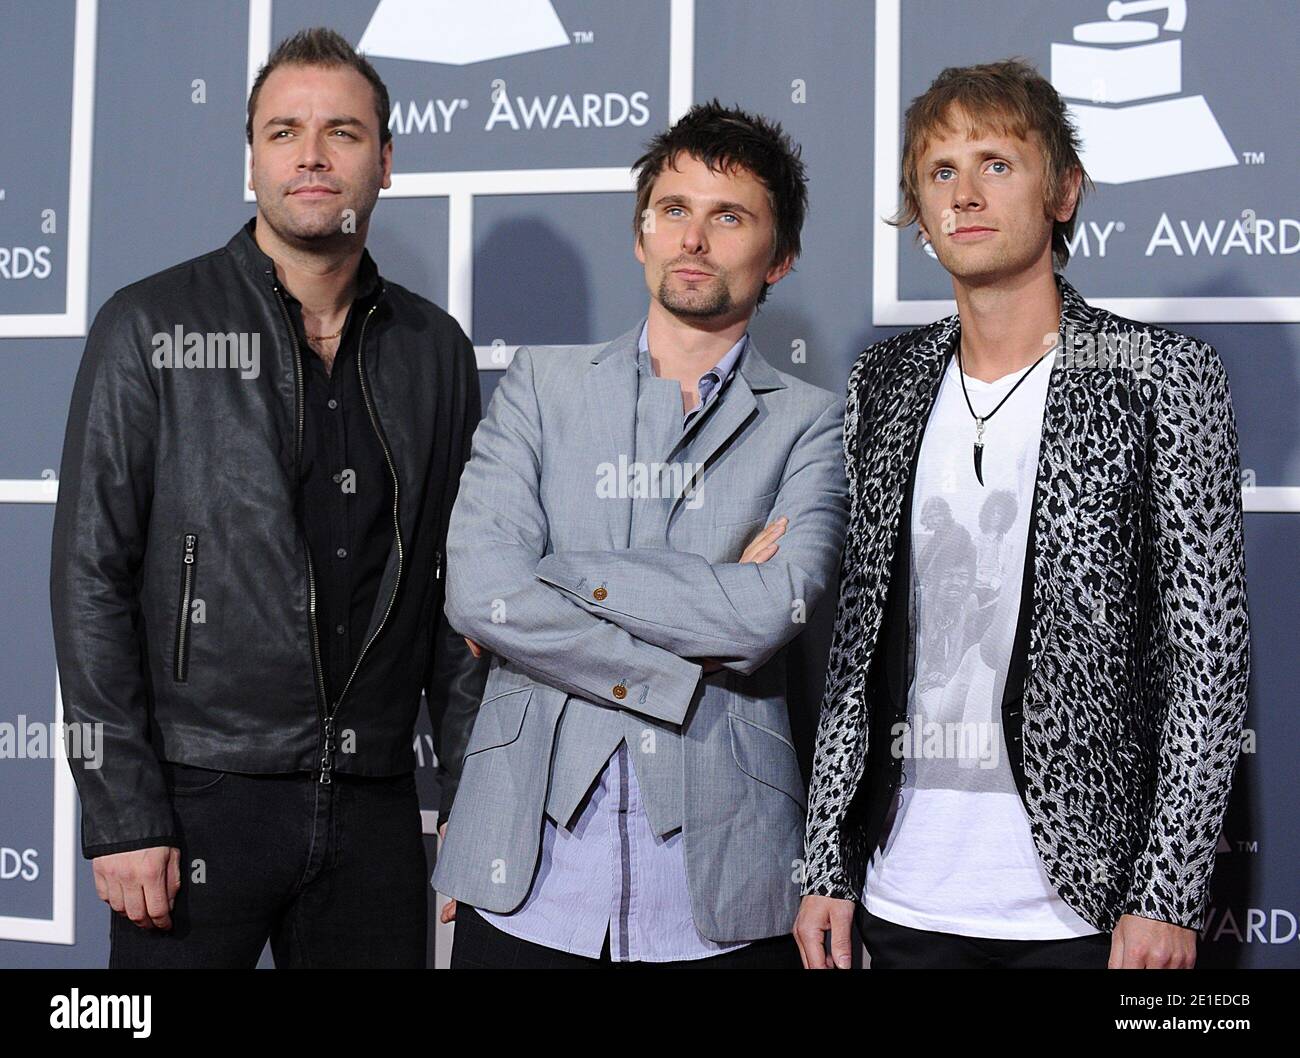 (left to right) Dominic Howard, Matthew Bellamy and Christopher Wolstenholme of Muse arriving at the 53rd Annual Grammy Awards held at the Staples Center in Los Angeles, California on February 13, 2011. Photo by Lionel Hahn/ABACAPRESS.COM Stock Photo